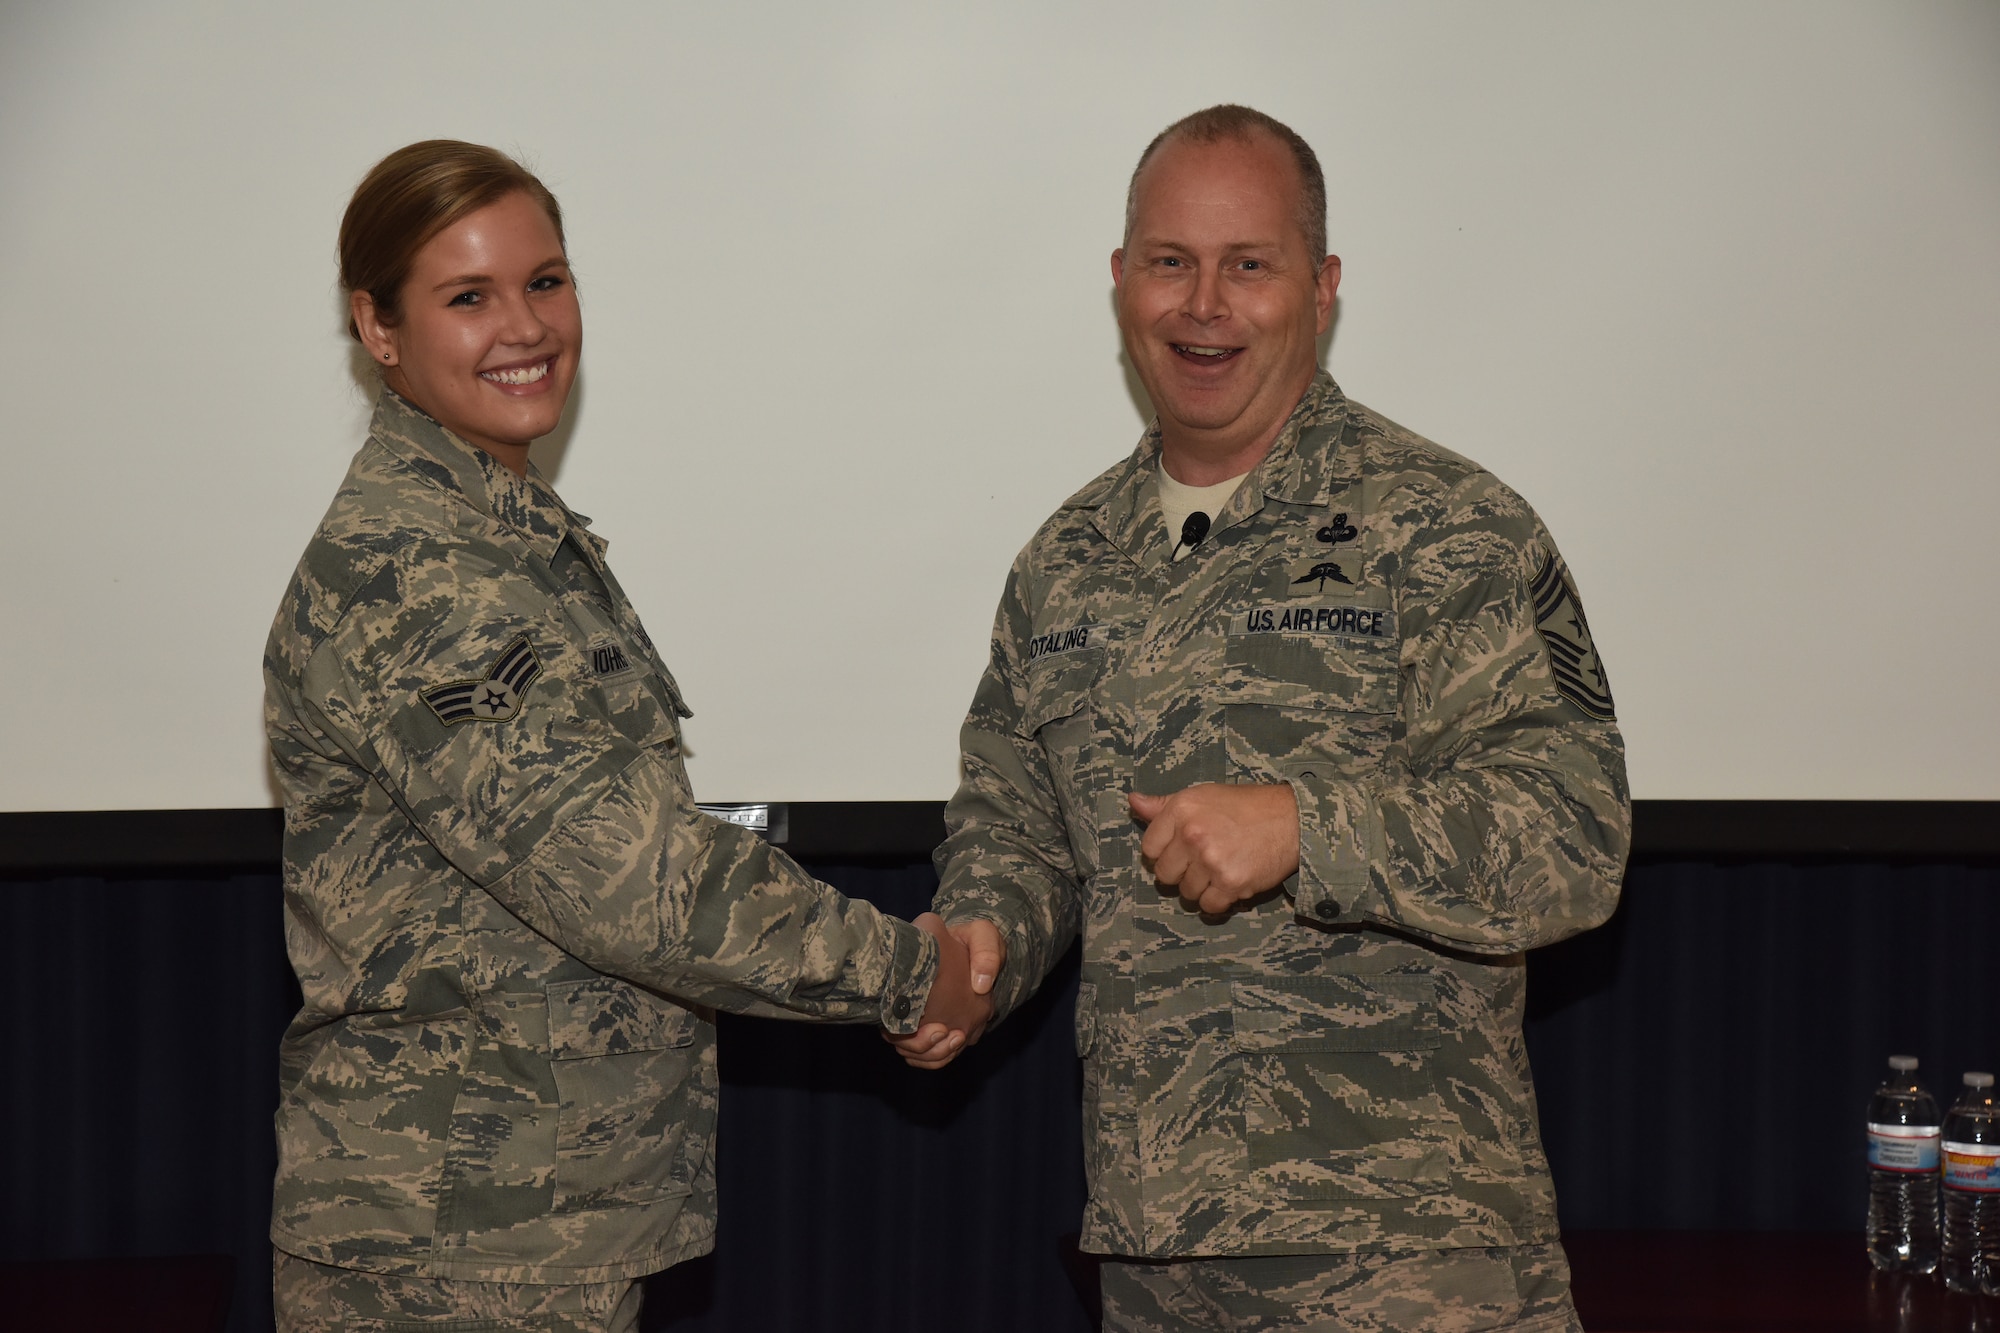 SIOUX FALLS, S.D. - Command Chief Master Sergeant of the Air National Guard James W. Hotaling presents his coin to Senior Airman Katherine Johnston, 114th Operations Group airfield management operations specialist, during his visit to the 114th Fighter Wing, Sioux Falls, S.D.,Nov. 7, 2015. The ANG’s senior enlisted advisor presented eight members of the 114th with his coin to recognize outstanding Airmen from the unit. (U.S. Air National Guard photo by Staff Sgt. Luke Olson/Released)